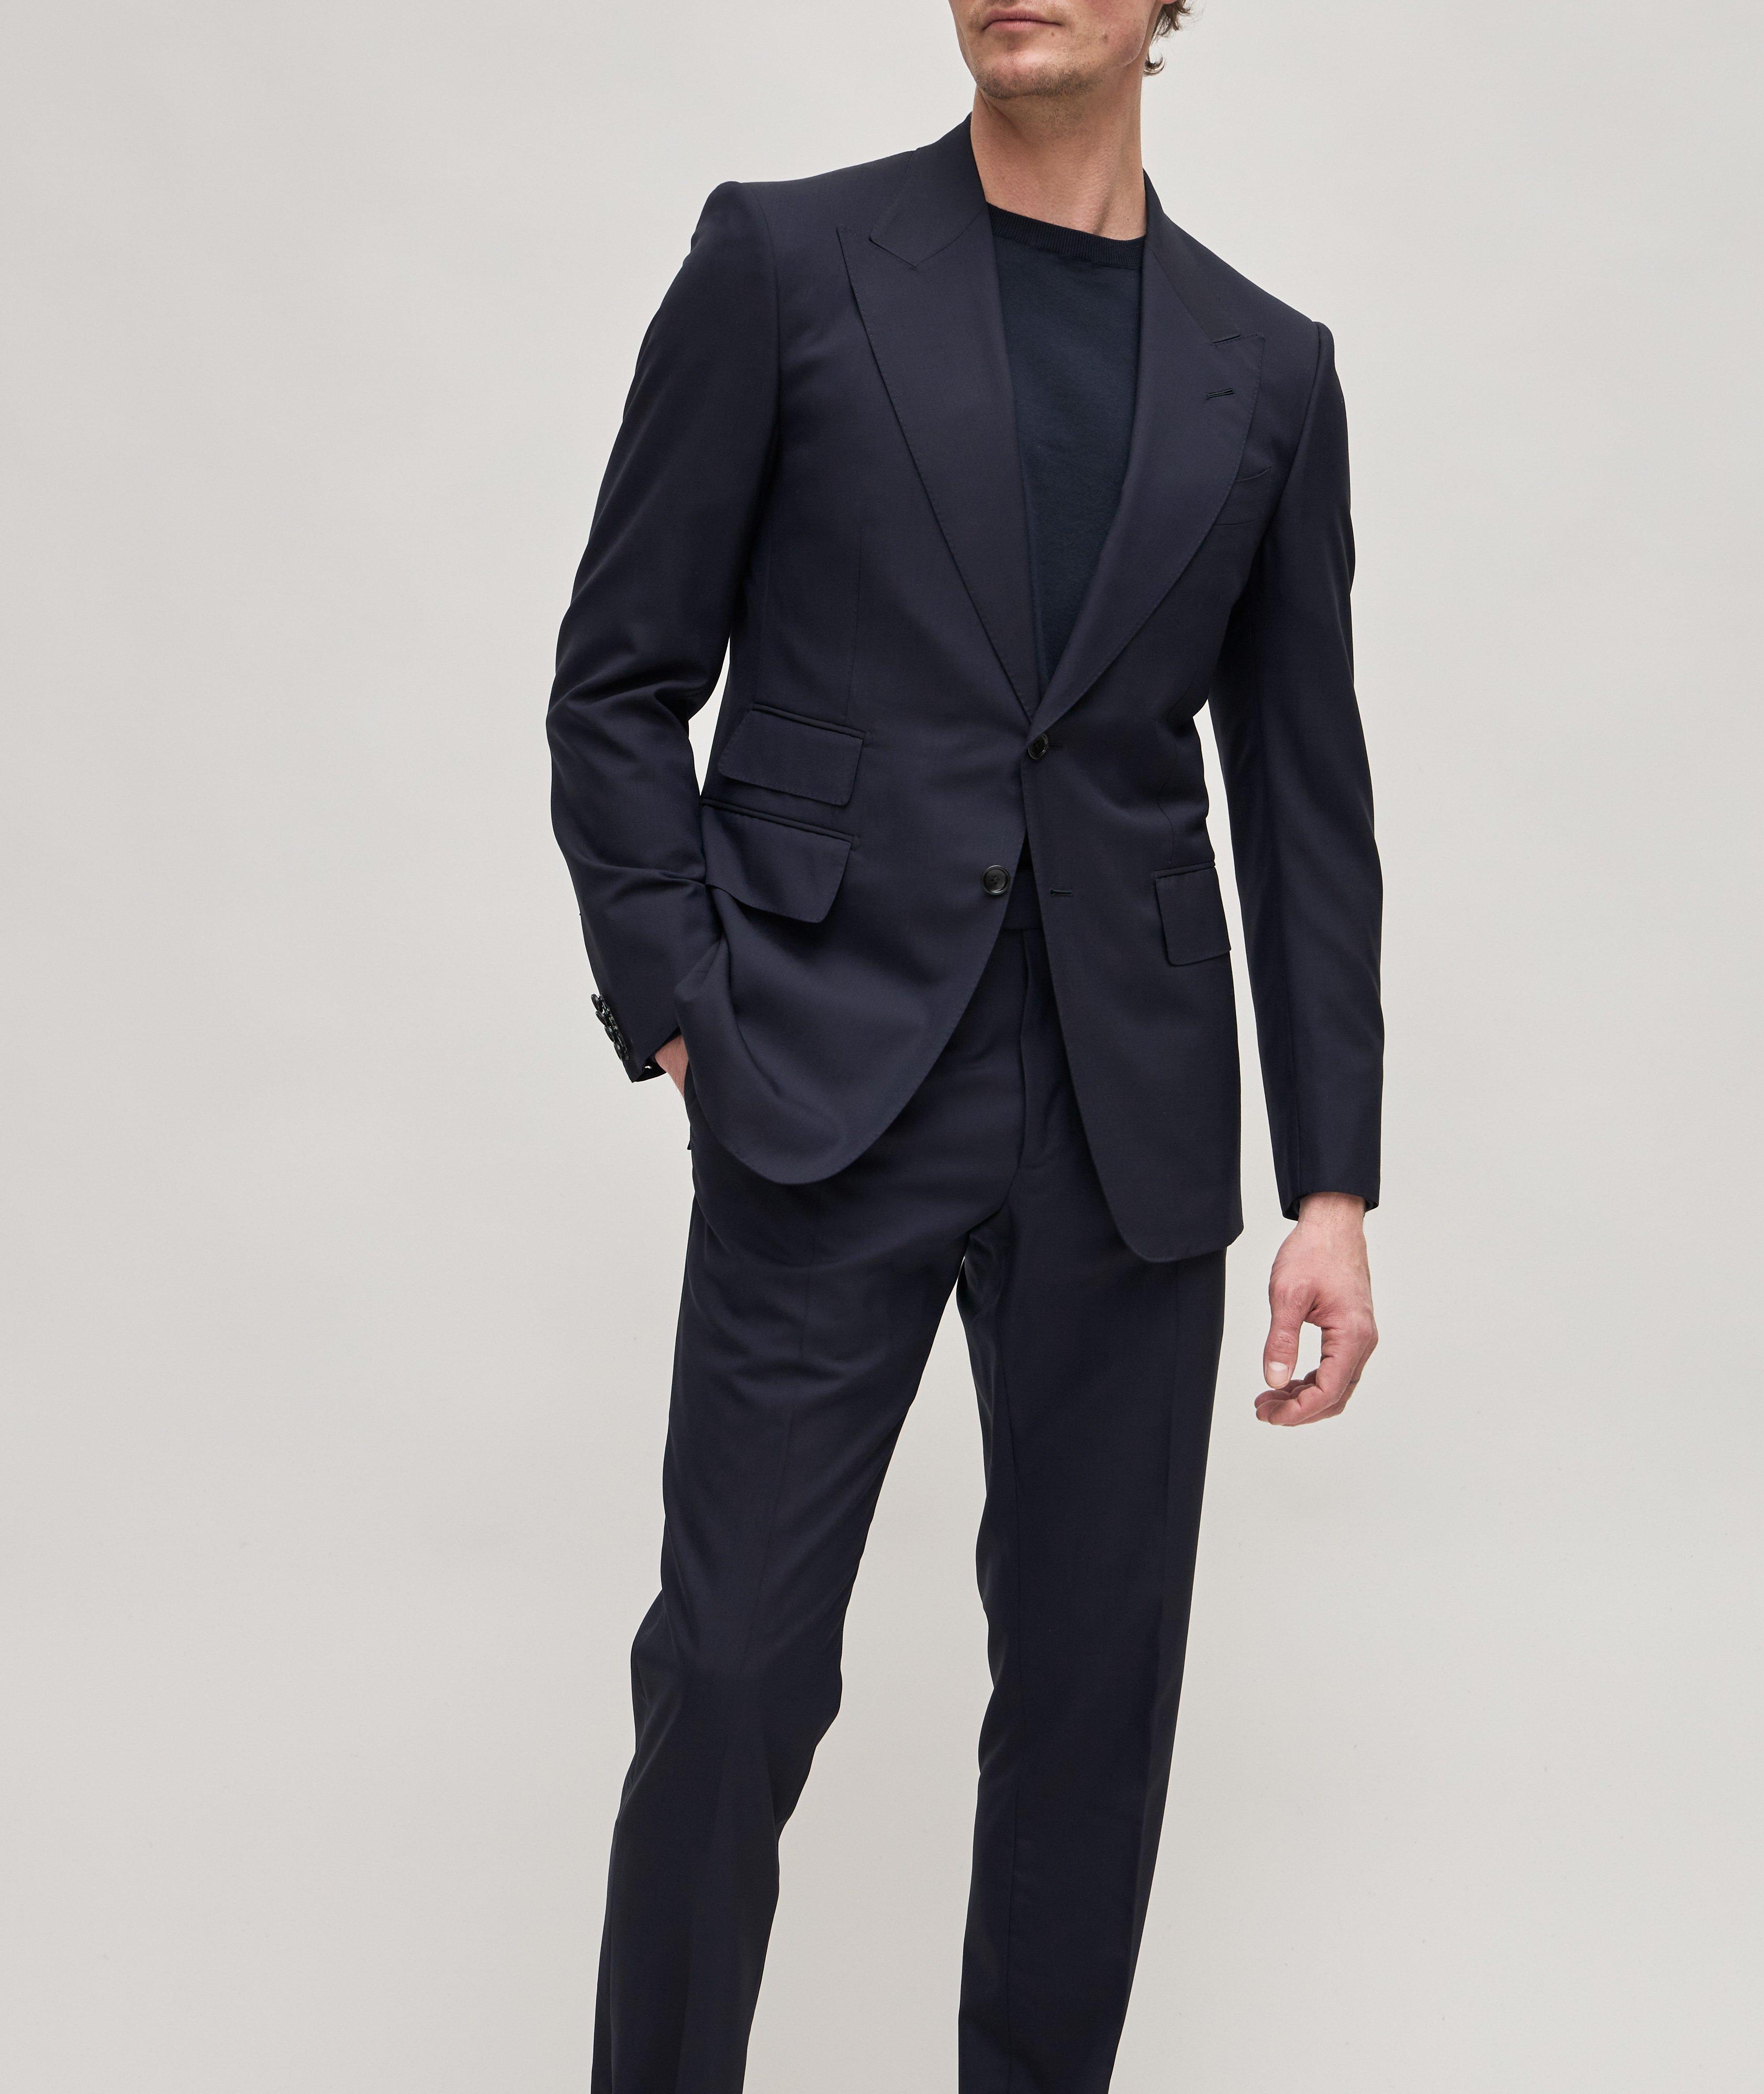 Shelton Solid Wool Suit image 1